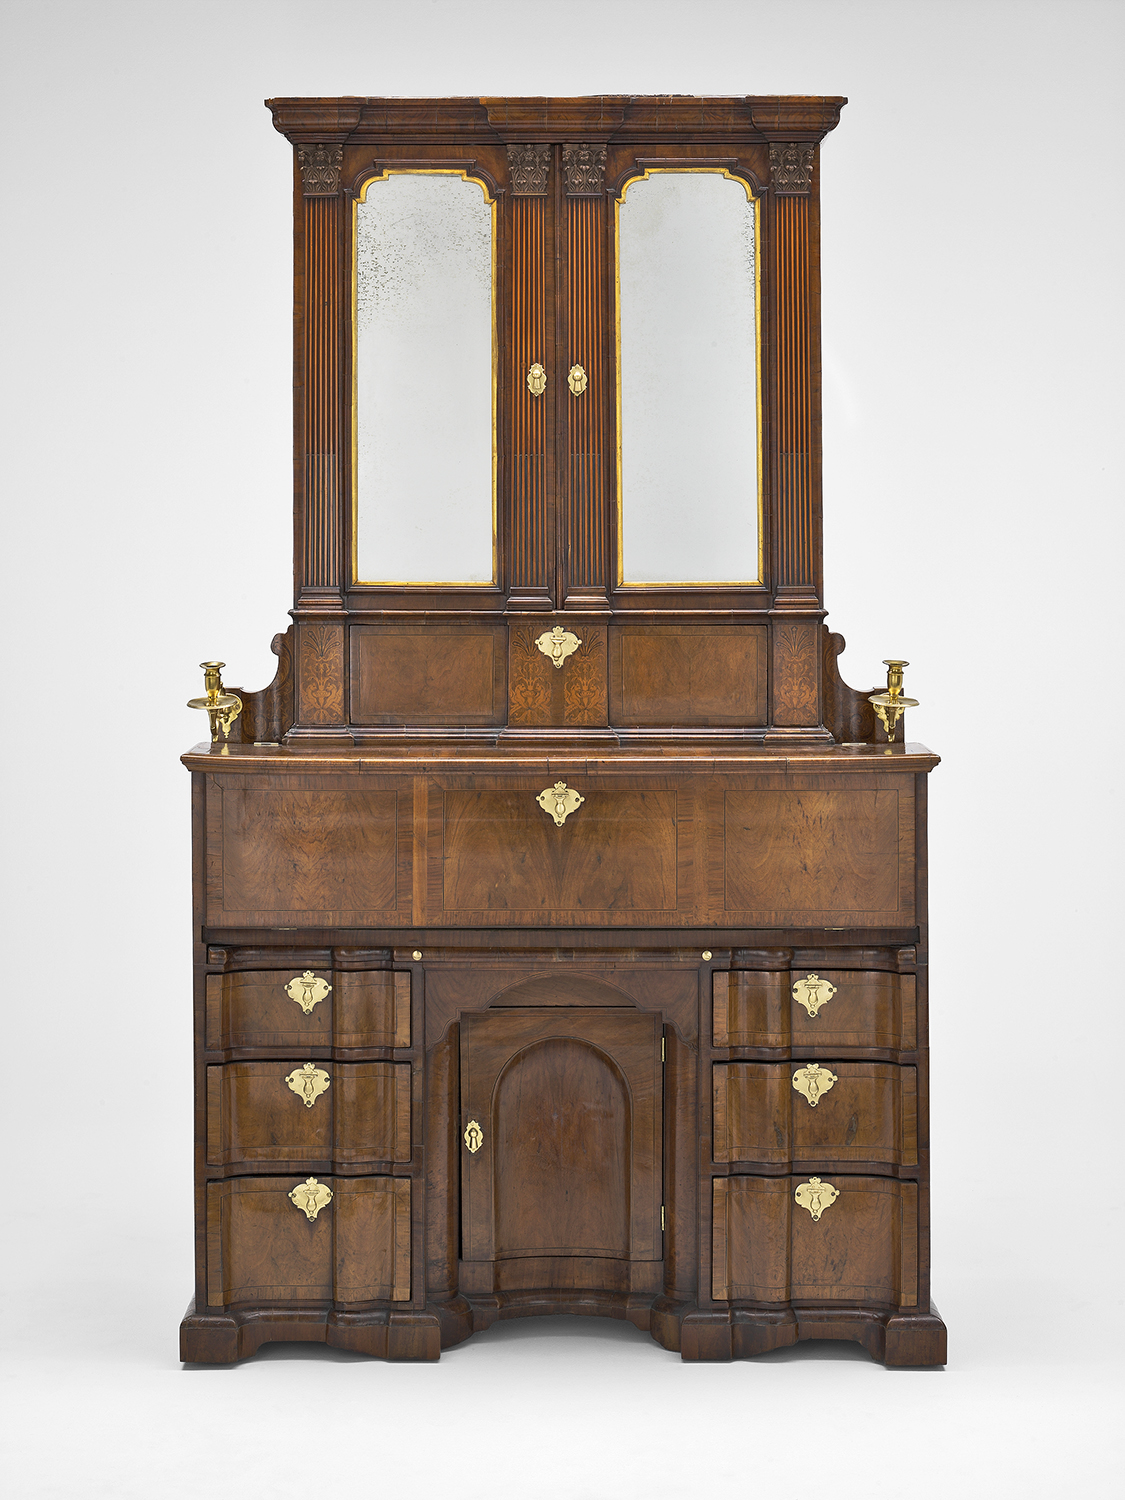 John Kirkhoffer Walnut  Secretary Cabinet, 1732. 18th-century Dublin was a booming city, attracting furniture makers and customers from England and the rest of Europe. The Kirkhoffer families were German Protestants who had fled to Ireland to escape religious persecution.  Jonathan Swift, author of Gulliver’s Travels, is said to have owned one of these cabinets. Art  Institute of Chicago. 